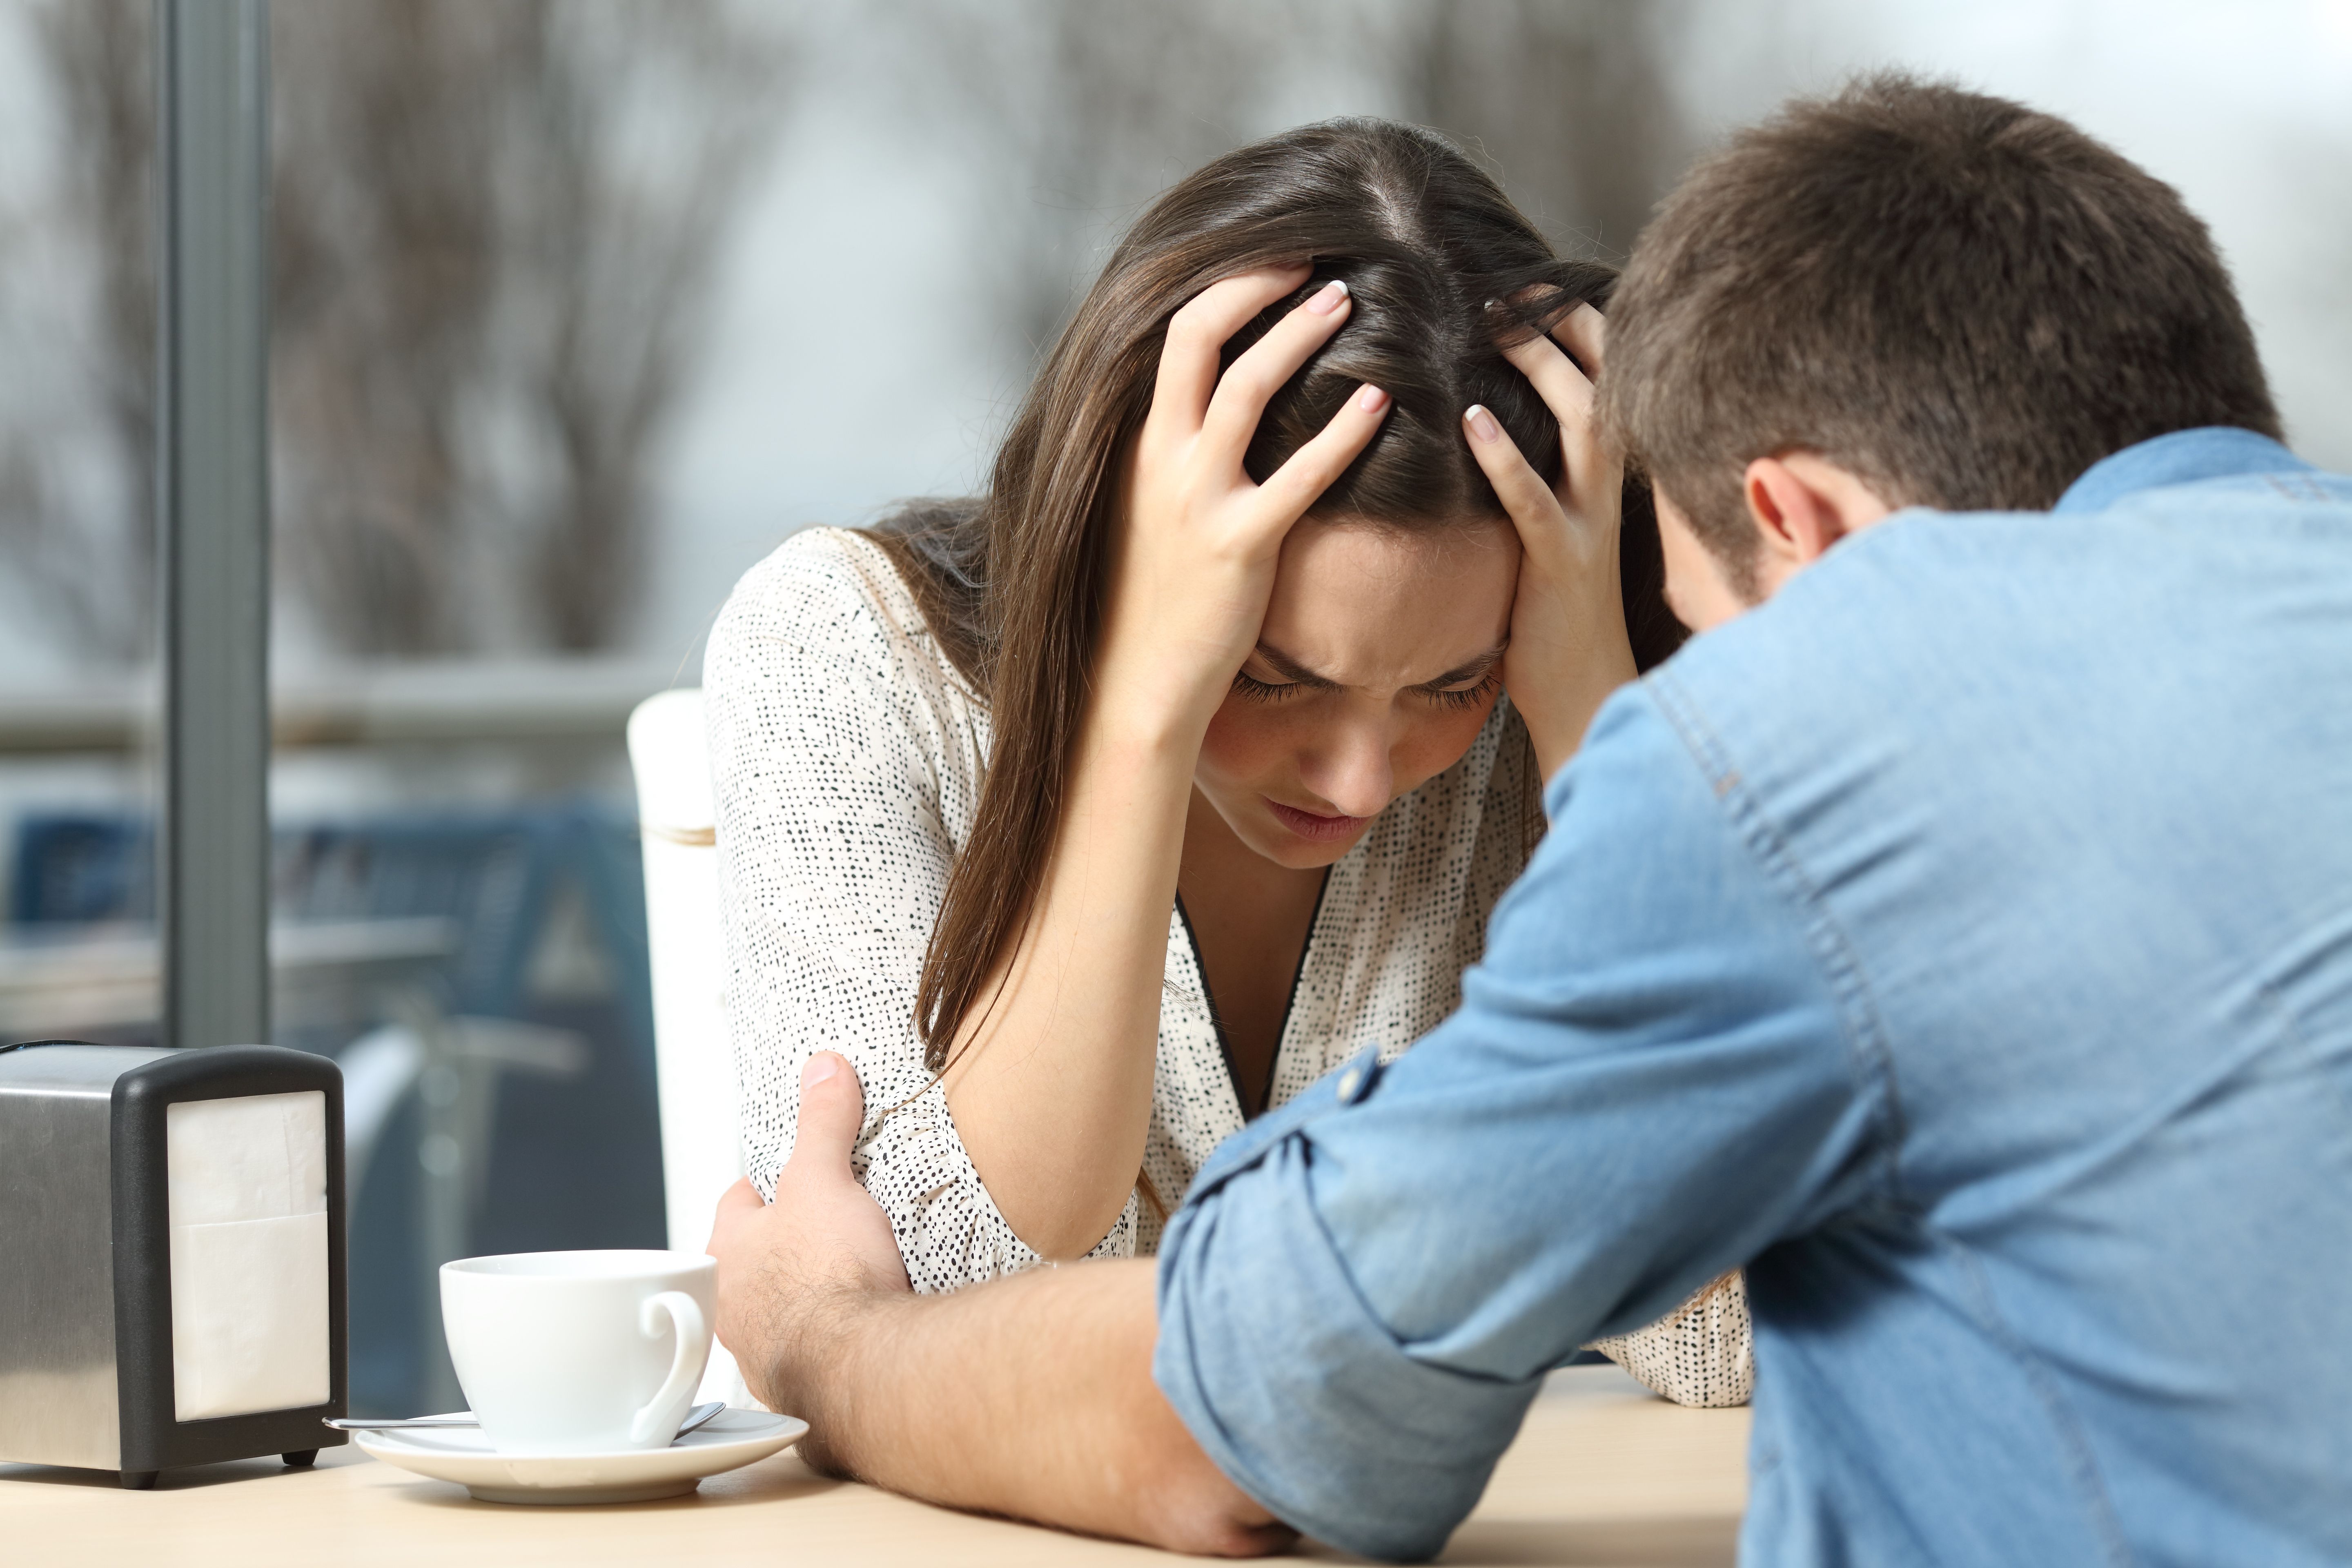 A man and a woman talk about a problem. | Source: Shutterstock